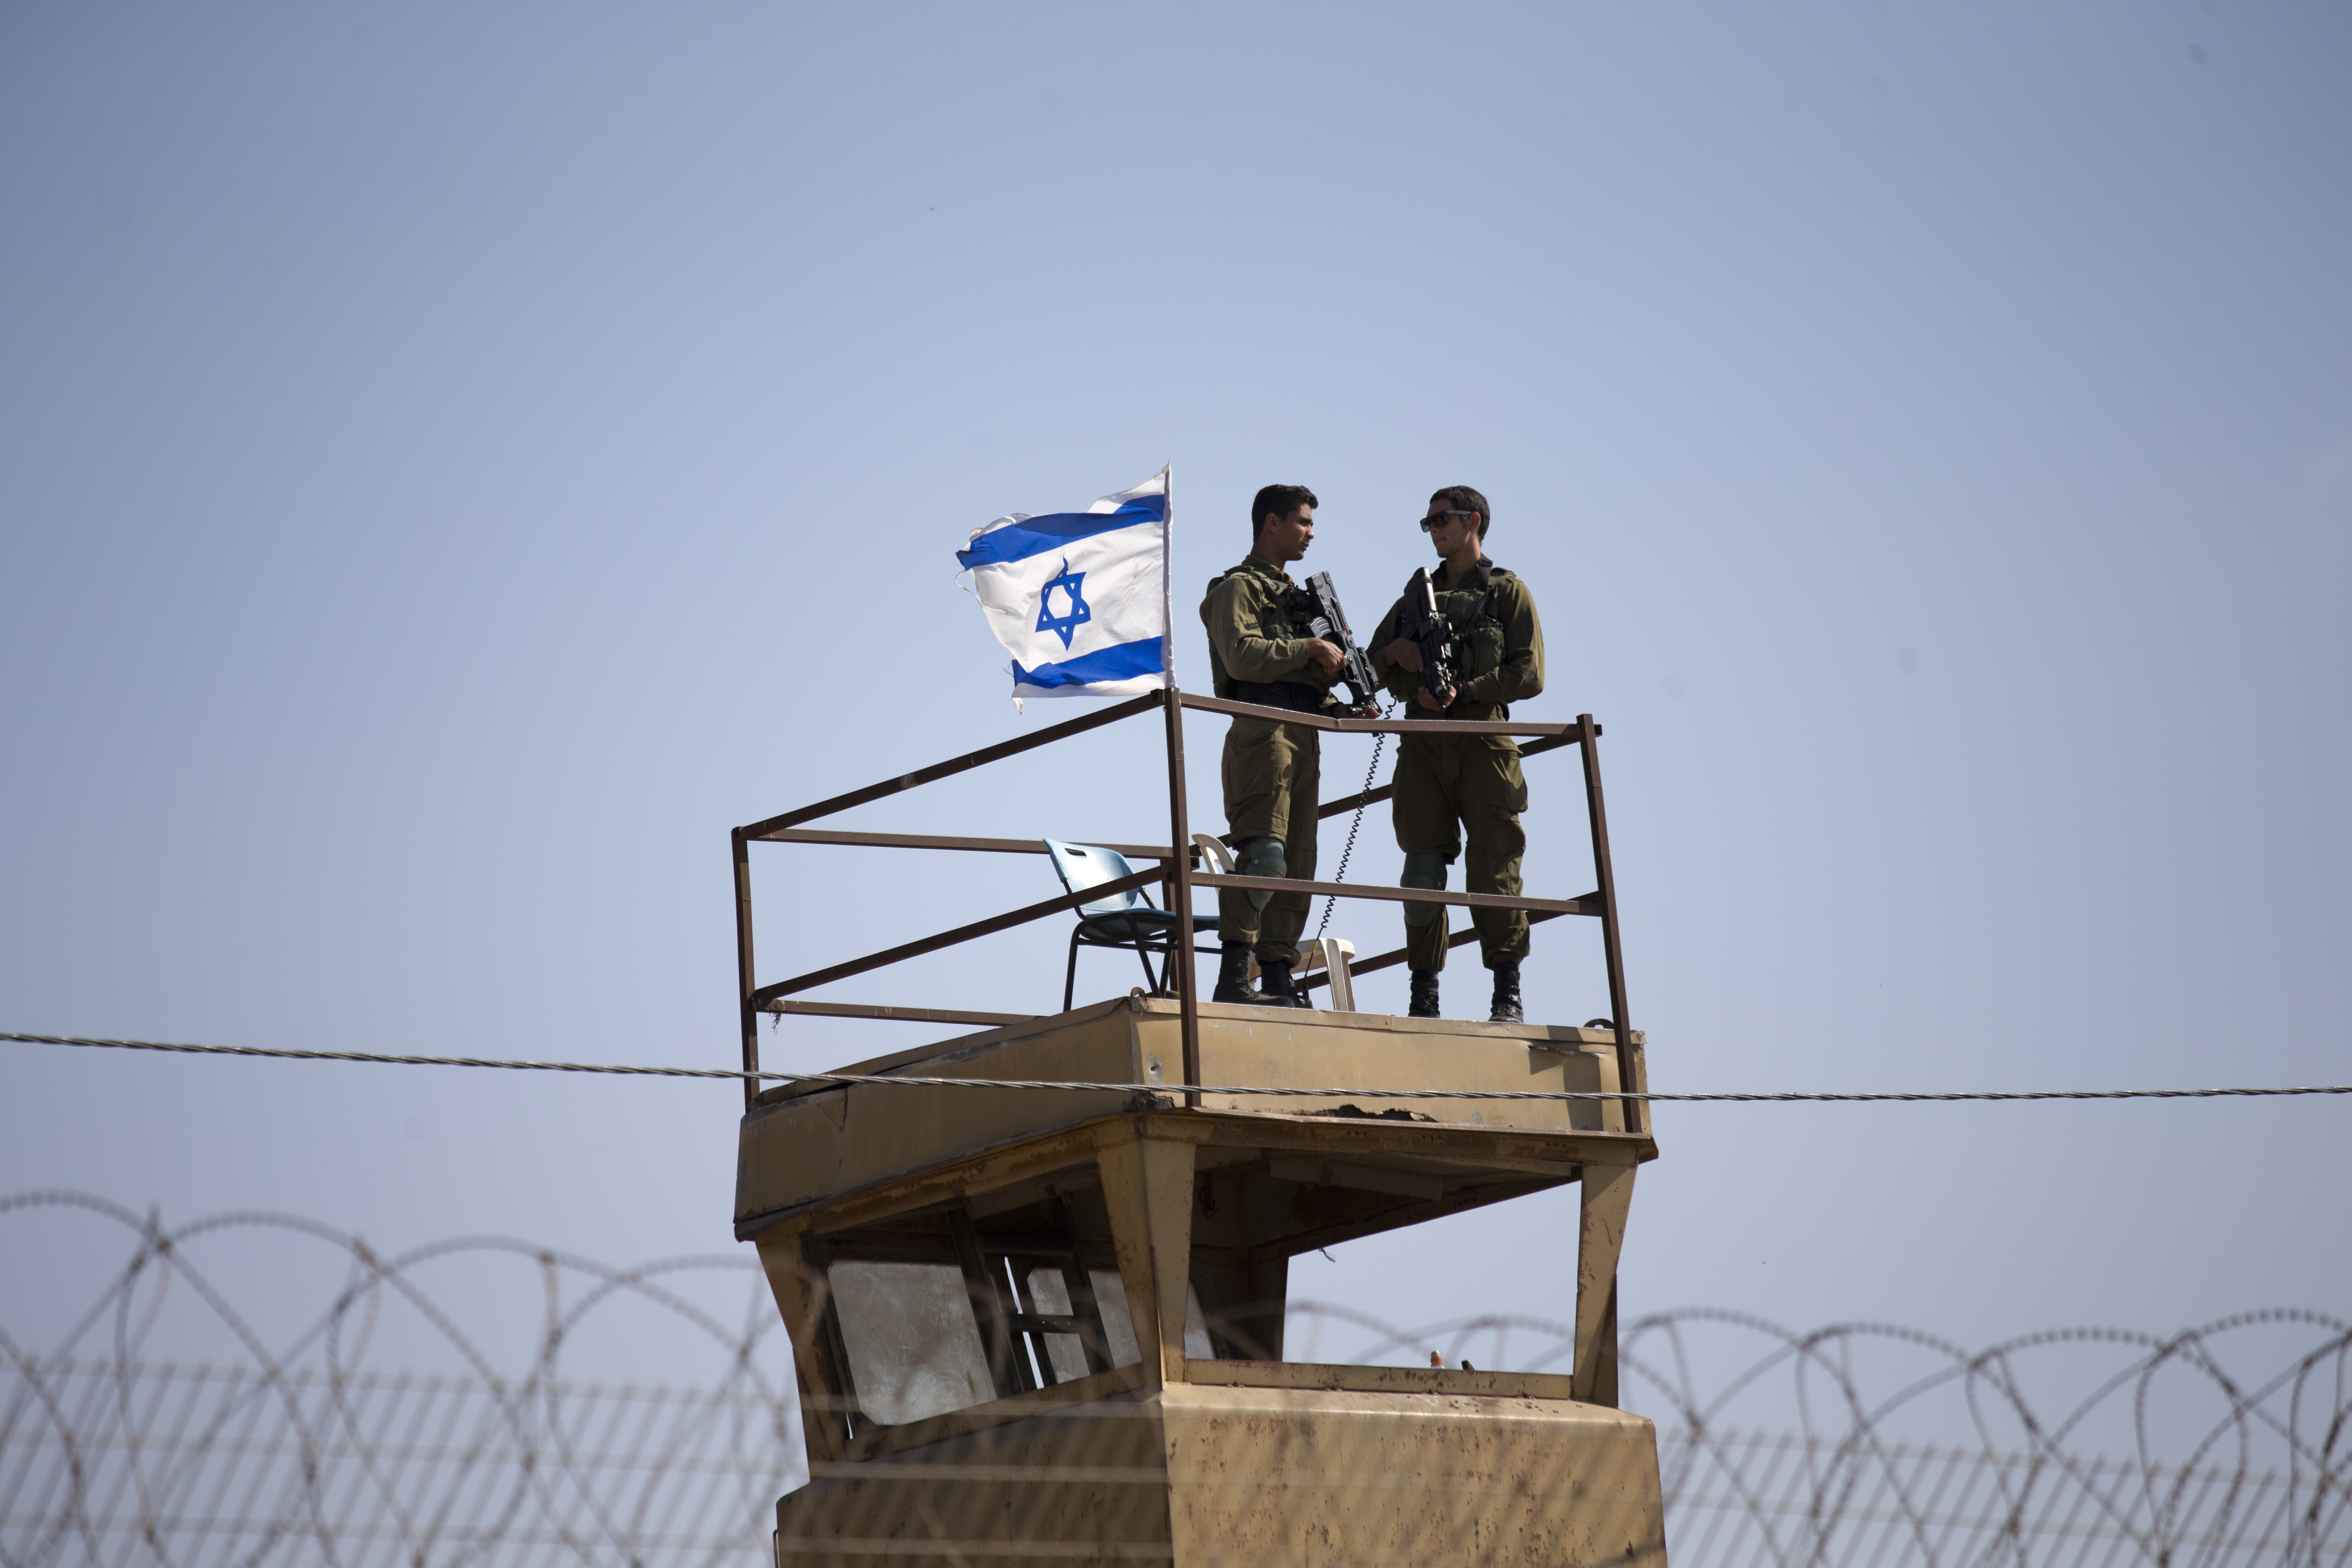 Israeli soldiers guard on top of a watch tower in a community along the Israel- Gaza Strip Border, Tuesday, May 15, 2018.  Thousands joined funeral processions Tuesday for some of the dozens of Palestinians killed by Israeli troops in a mass march on the Gaza border, as Israelis faced growing diplomatic fallout from the use of lethal force against unarmed protesters.(AP Photo/Ariel Schalit)